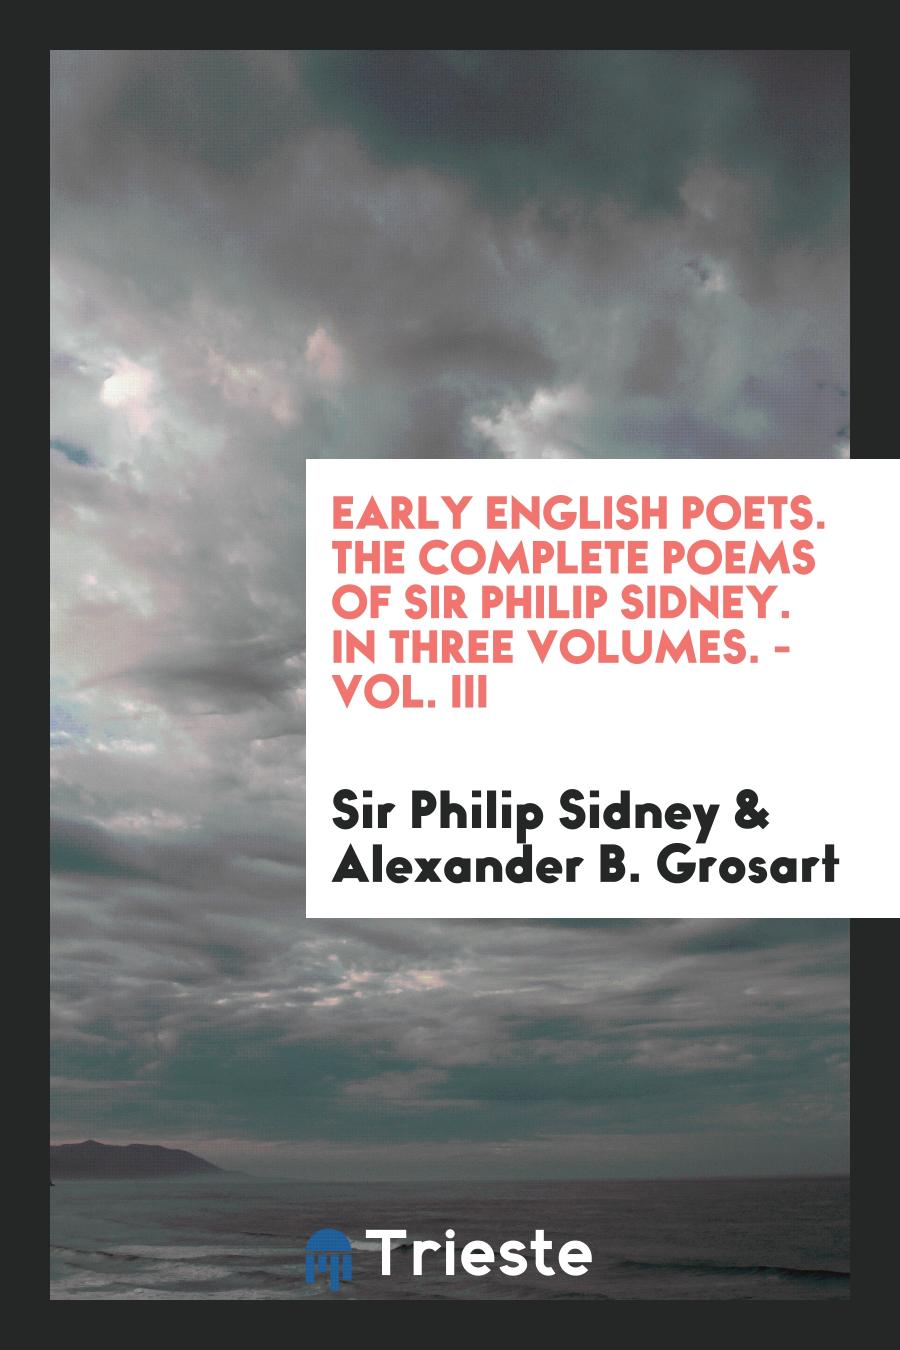 Early English Poets. The Complete Poems of Sir Philip Sidney. In Three Volumes. - Vol. III